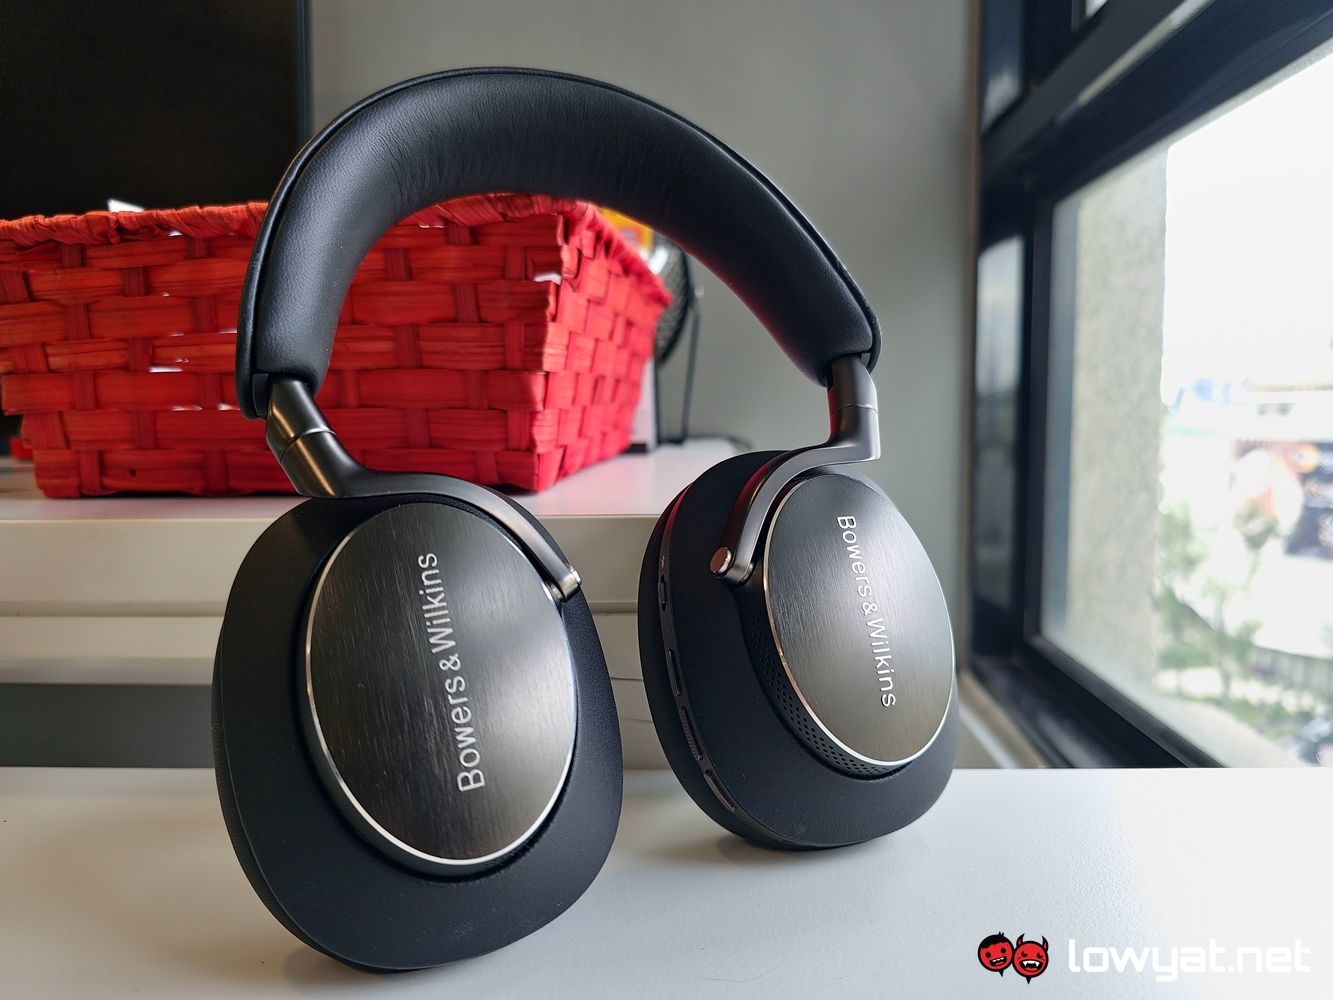 Bowers & Wilkins Px8 review: luxurious and capable, but pricey